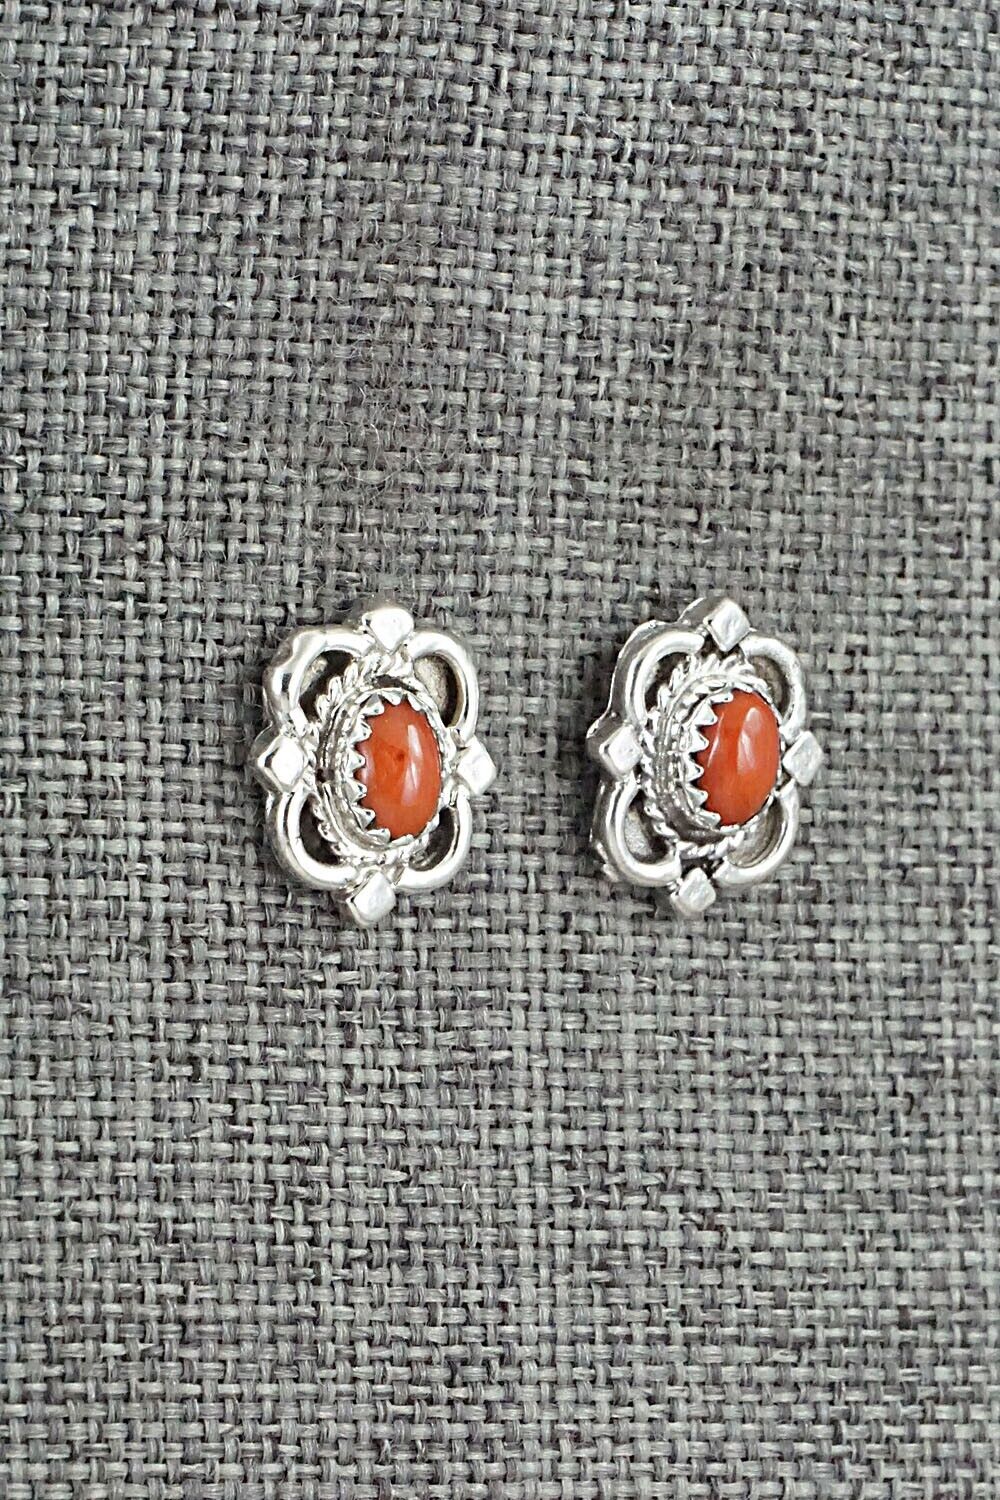 Coral & Sterling Silver Earrings - Theresa Smith